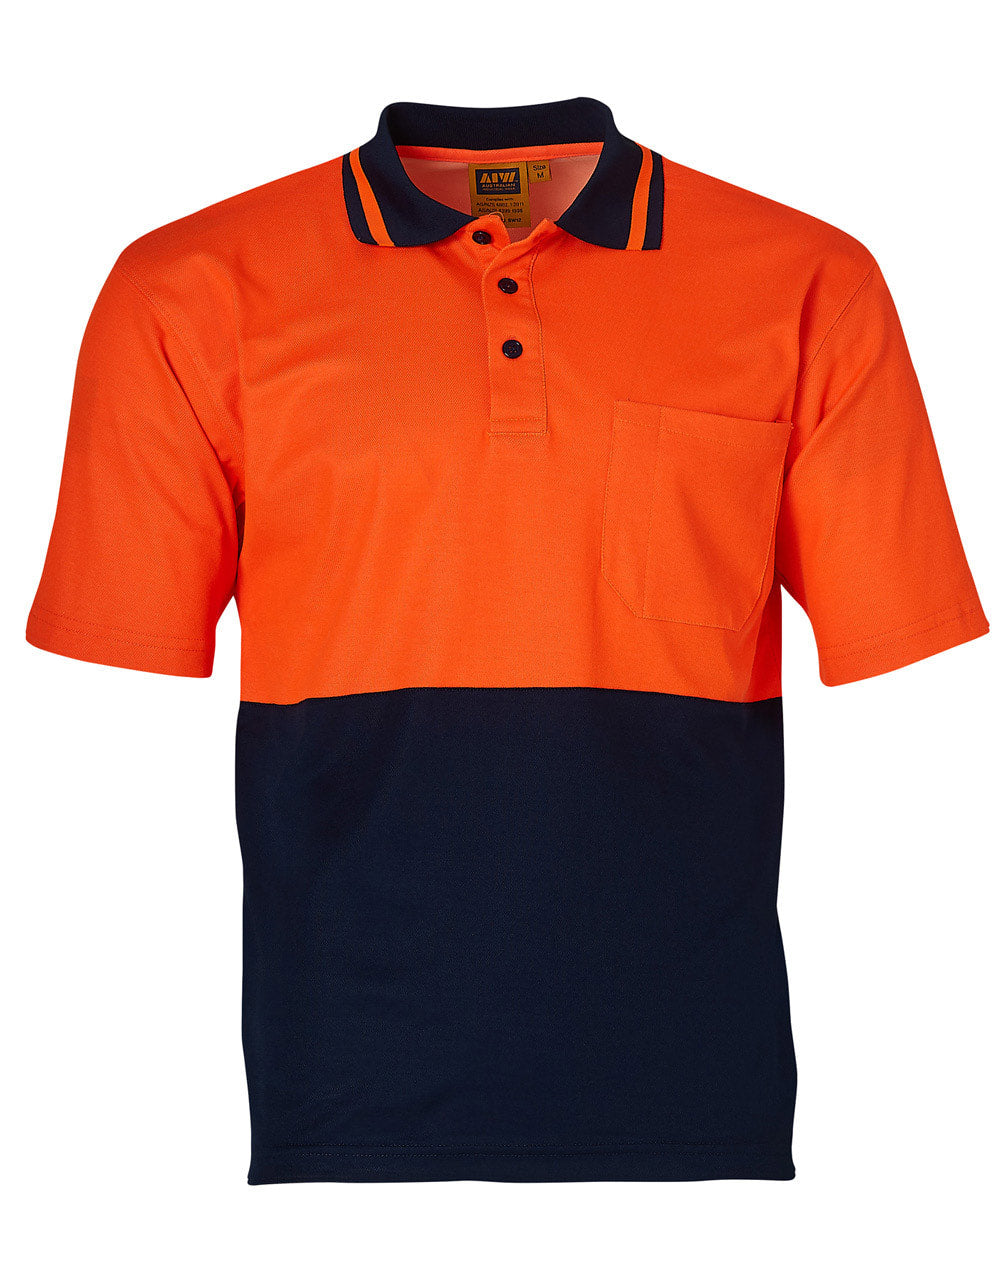 AIW SW12 SAFETY POLO